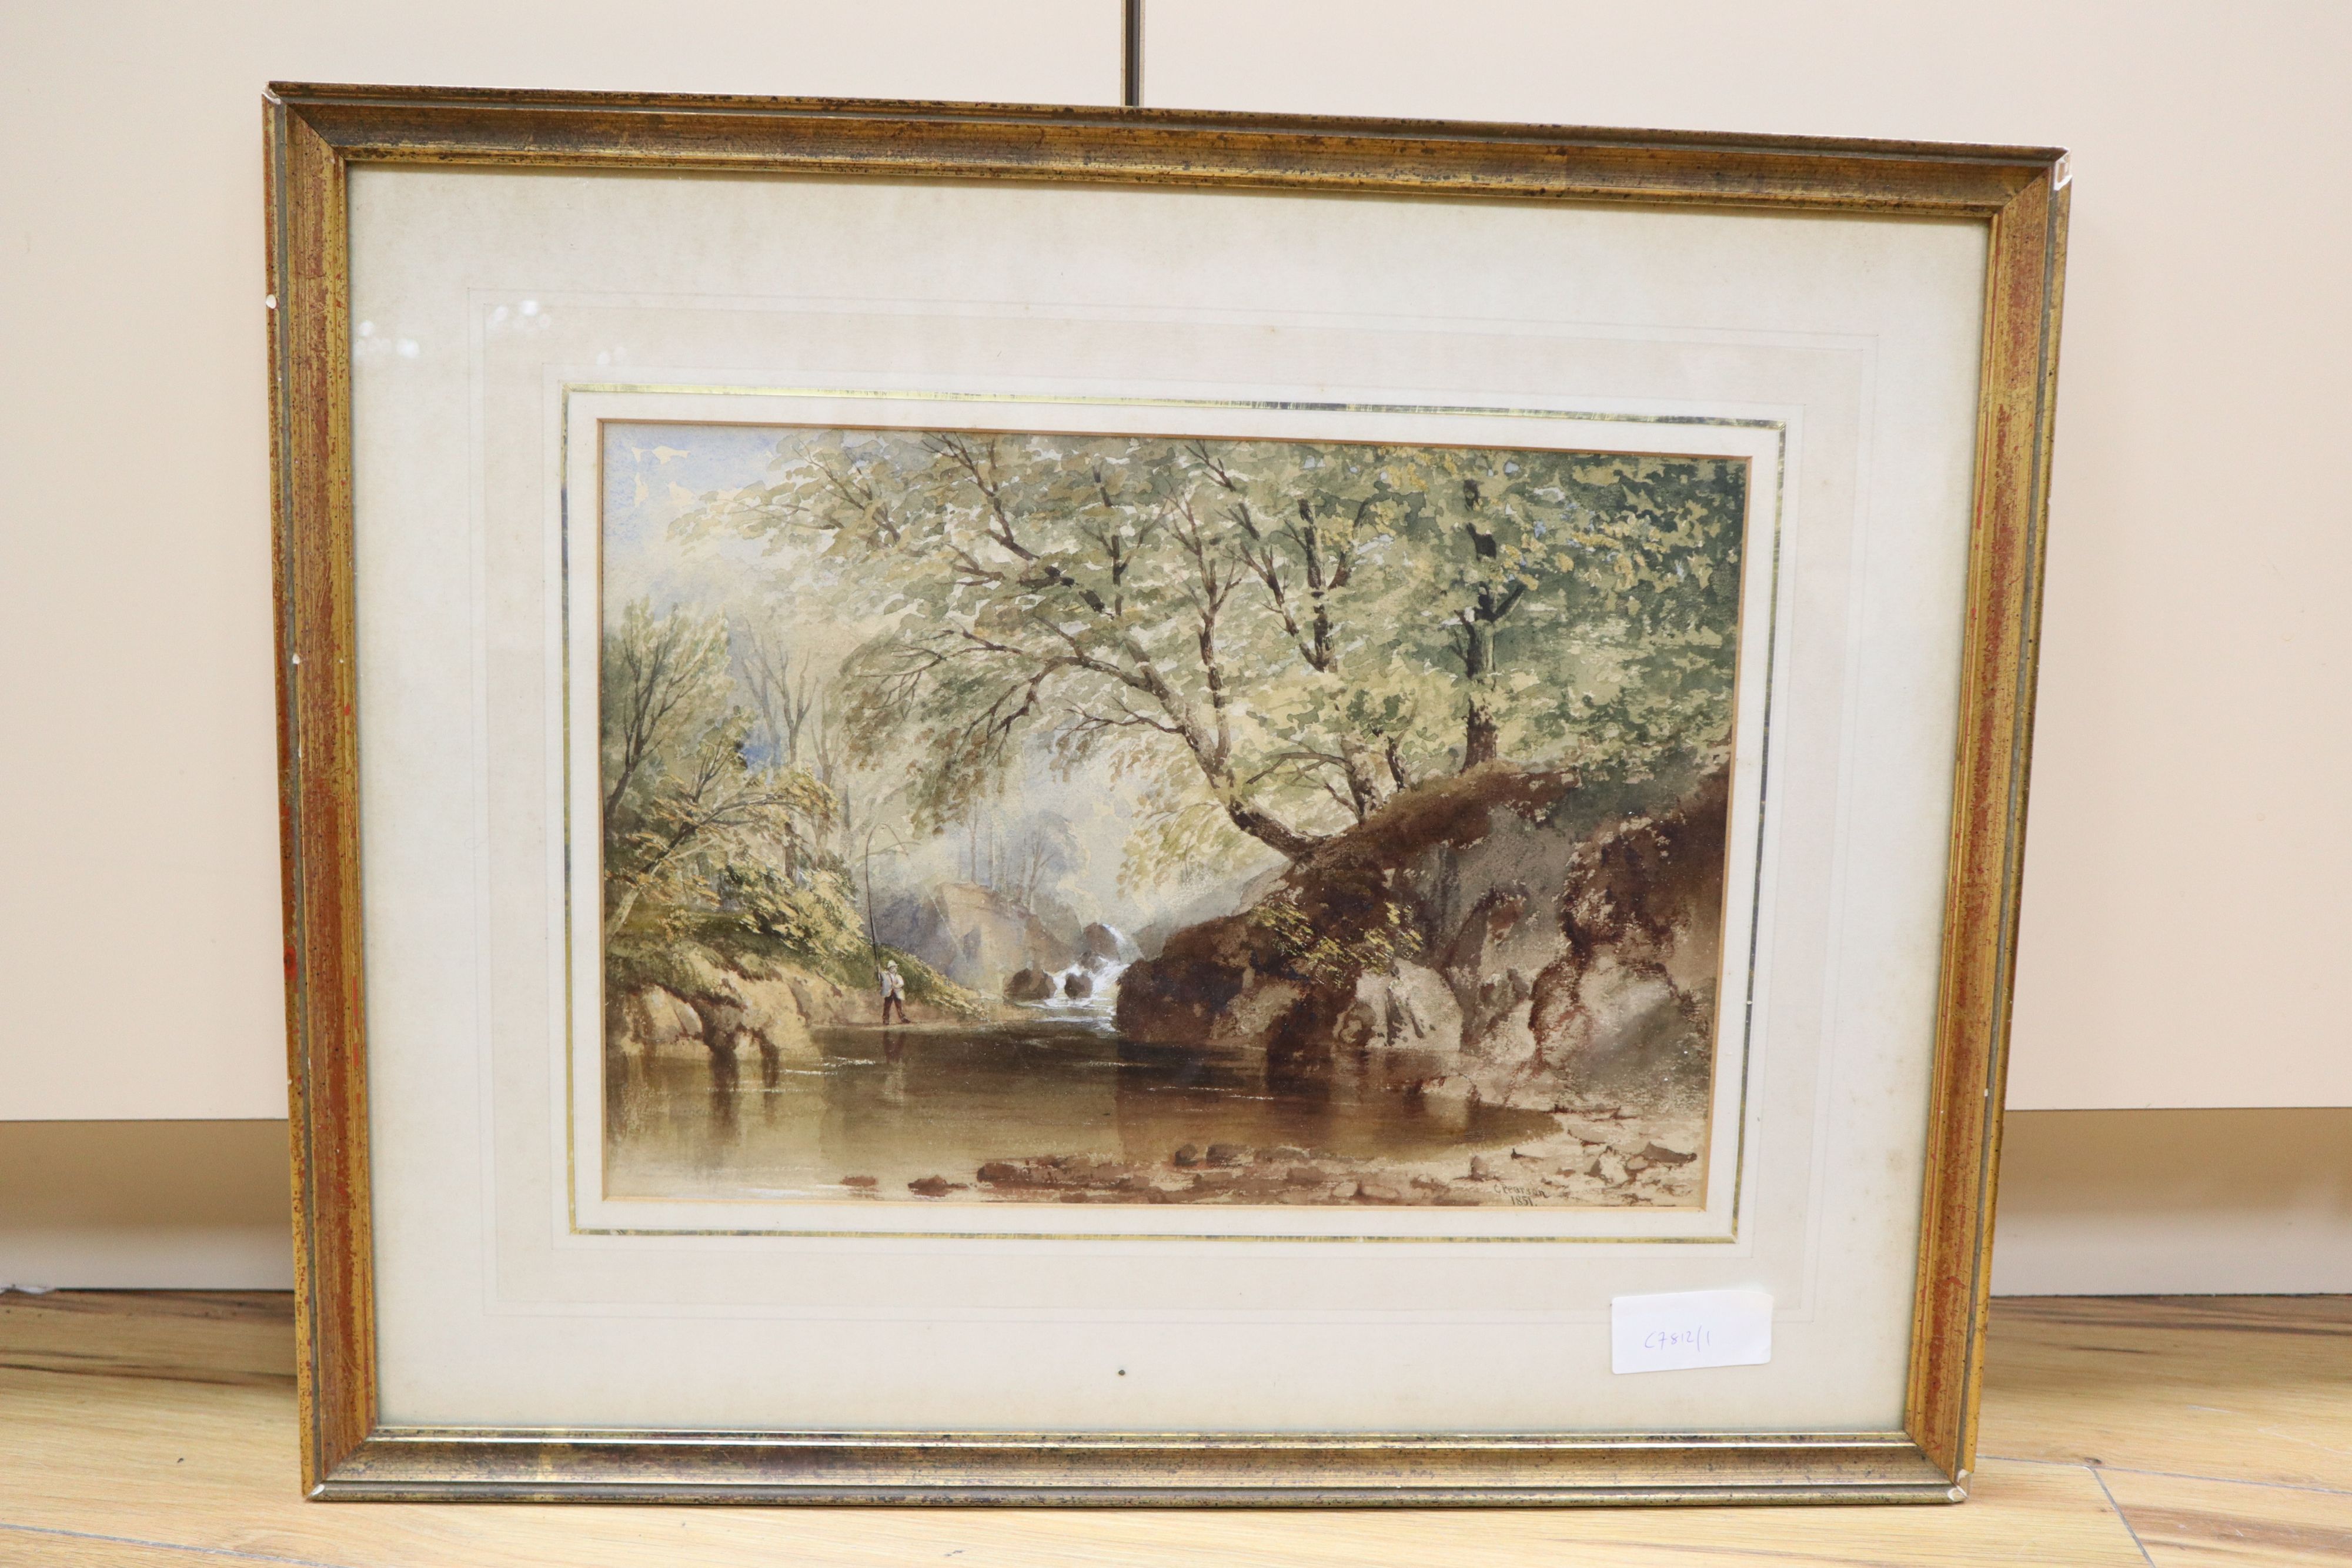 Cornelius Pearson (1805-1891), watercolour, Angler beside a wooded stream, signed and dated 1851, 23 x 33cm